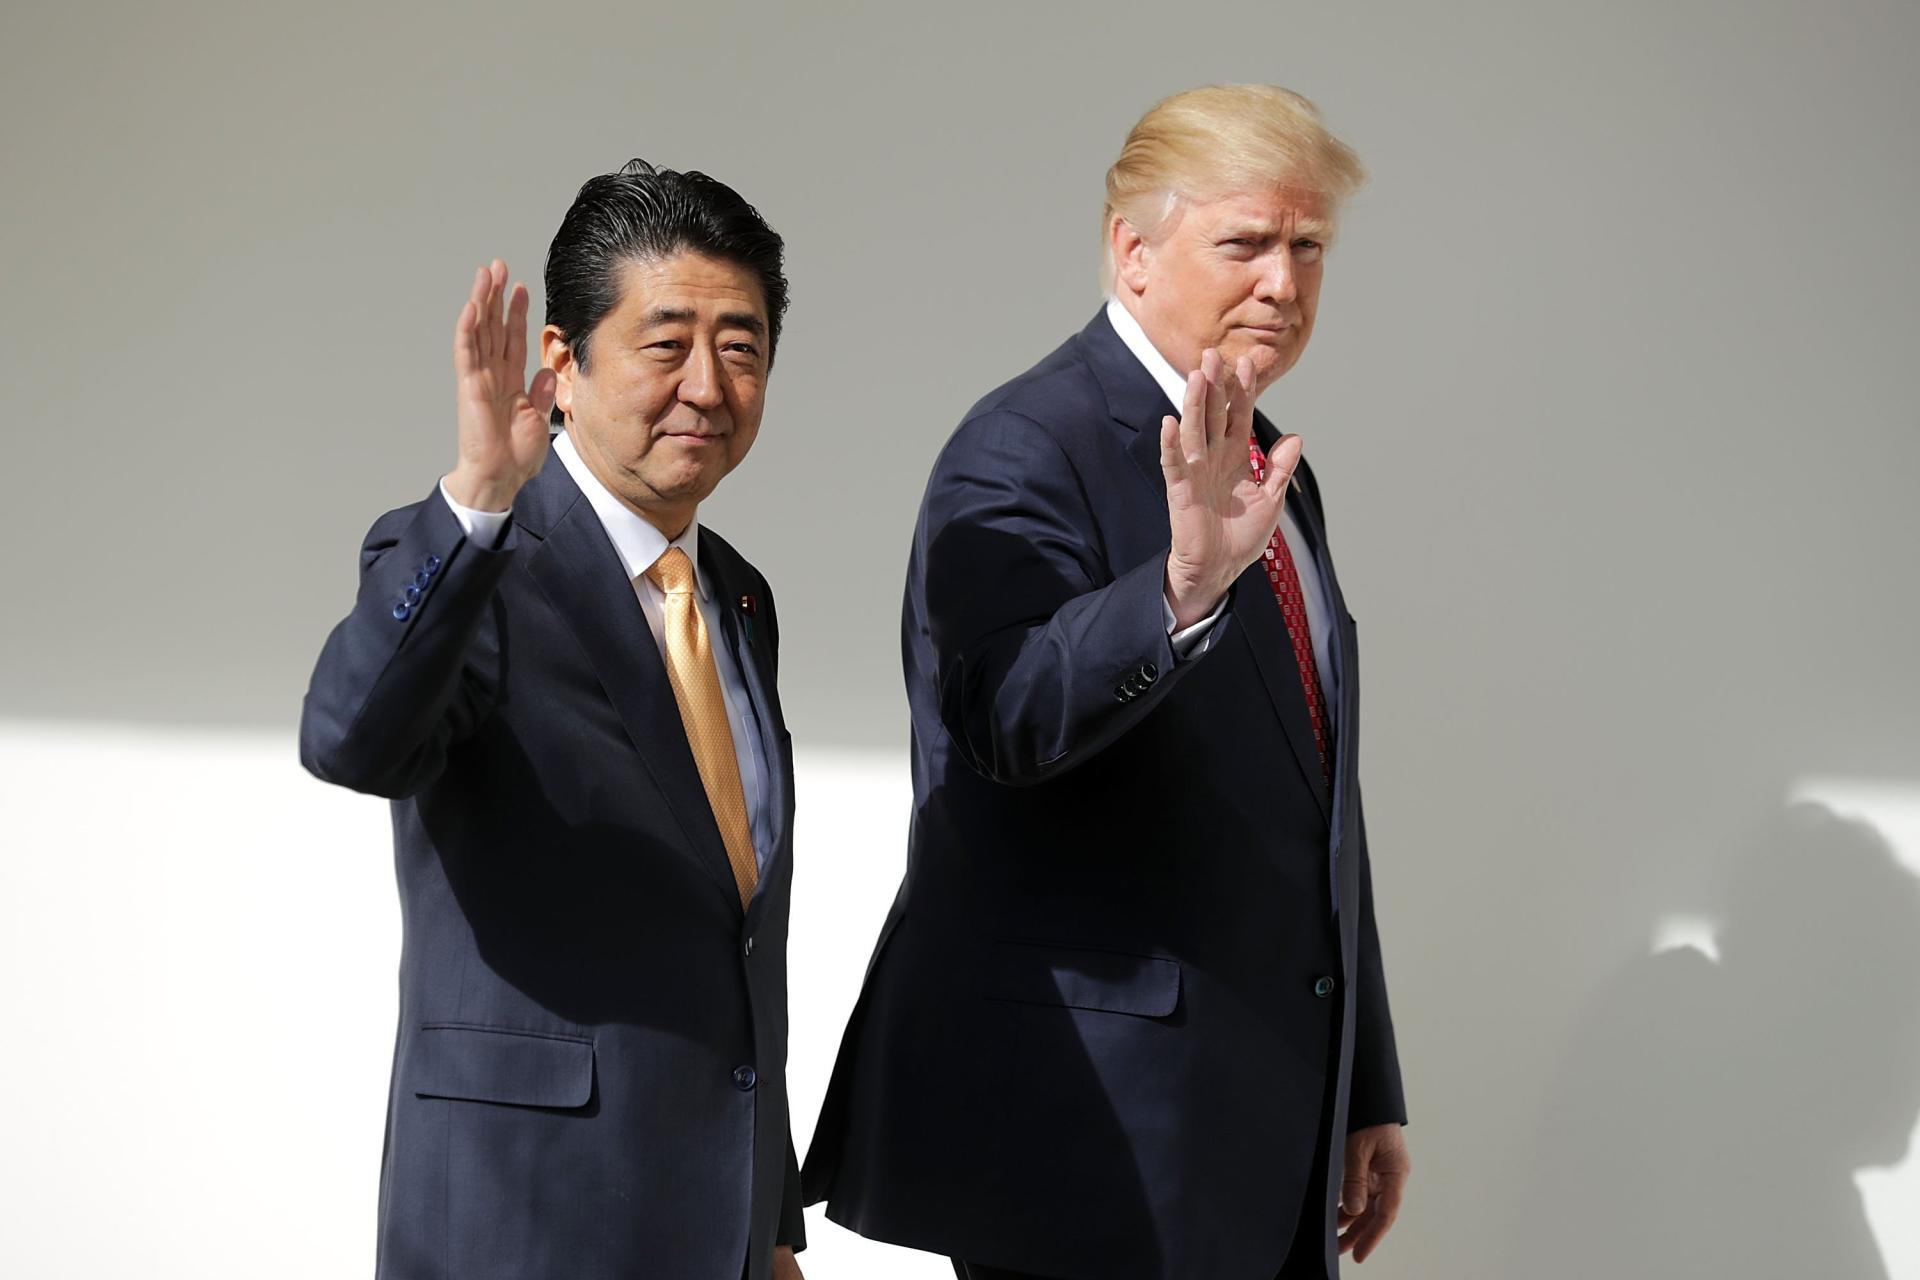 Japan's PM says talks with Trump on trade were constructive ahead of meetings this week